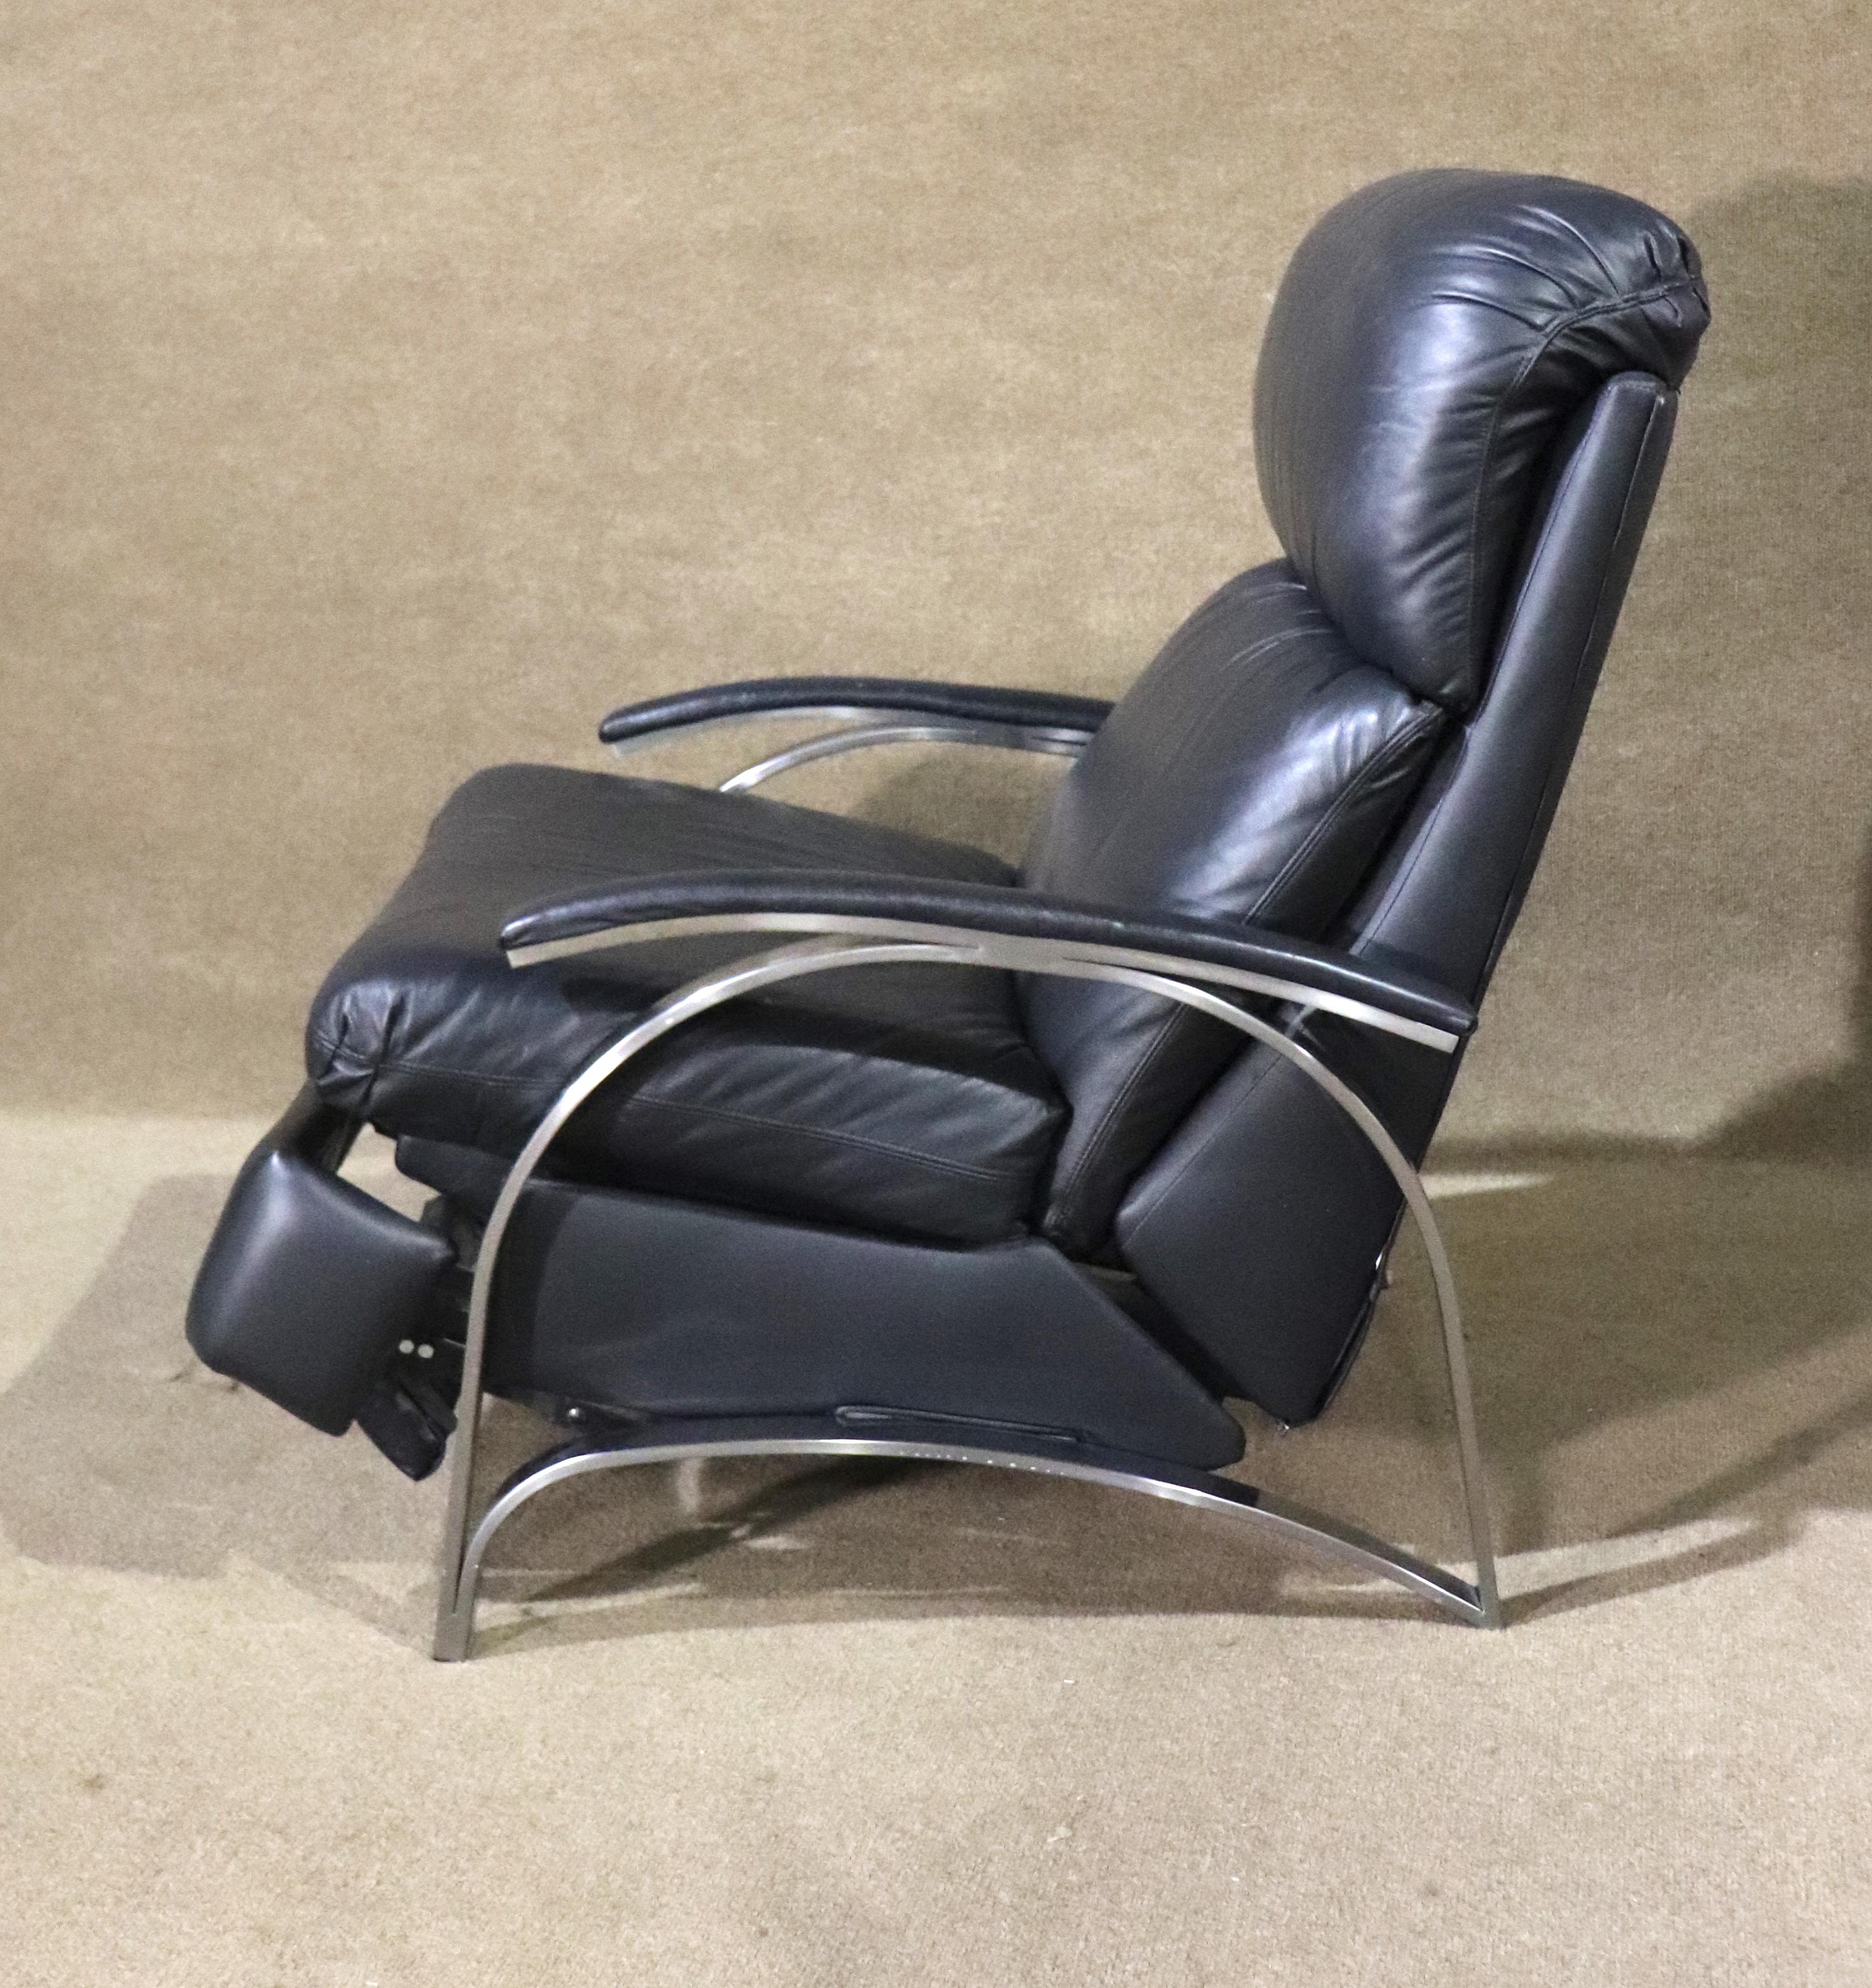 Comfortable leather reclining lounge chair by Barcalounger. Polished chrome frame in a mid-century modern style, with soft leather chair that can recline fully.
Please confirm location NY or NJ